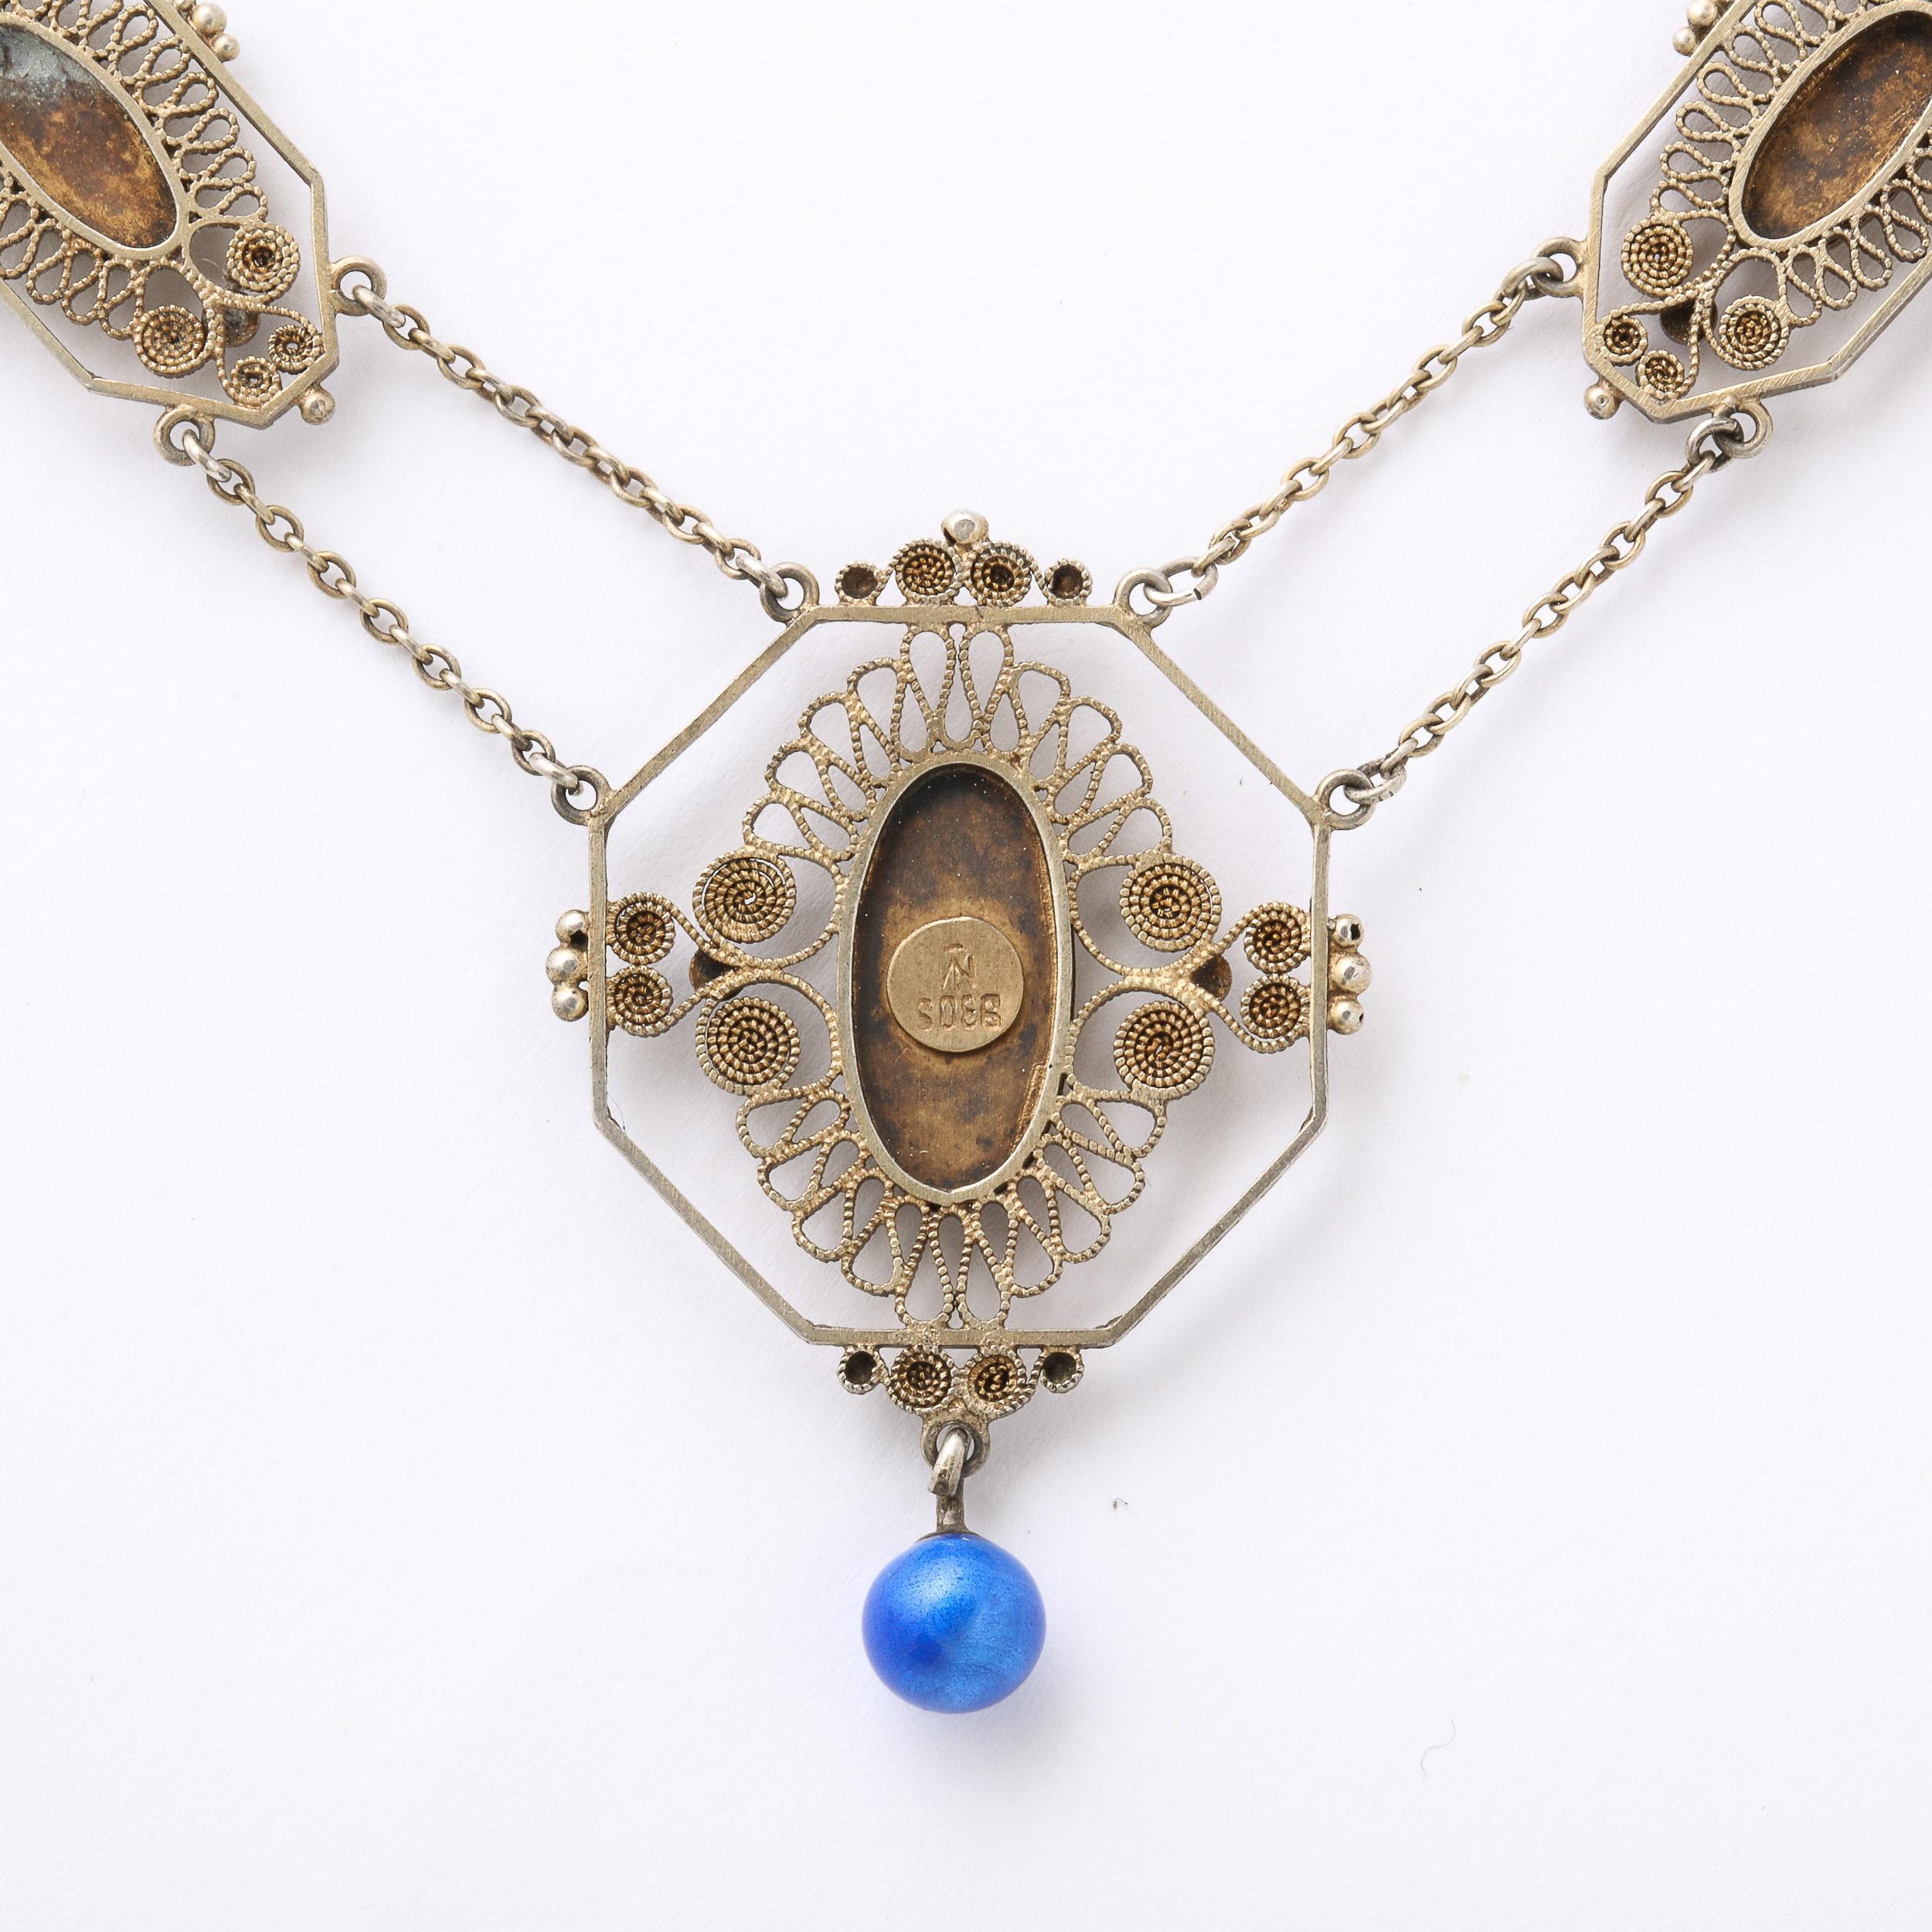 Antique Silver Filigree Swag Style Necklace with Blue Guilloche Enamel Accents 3